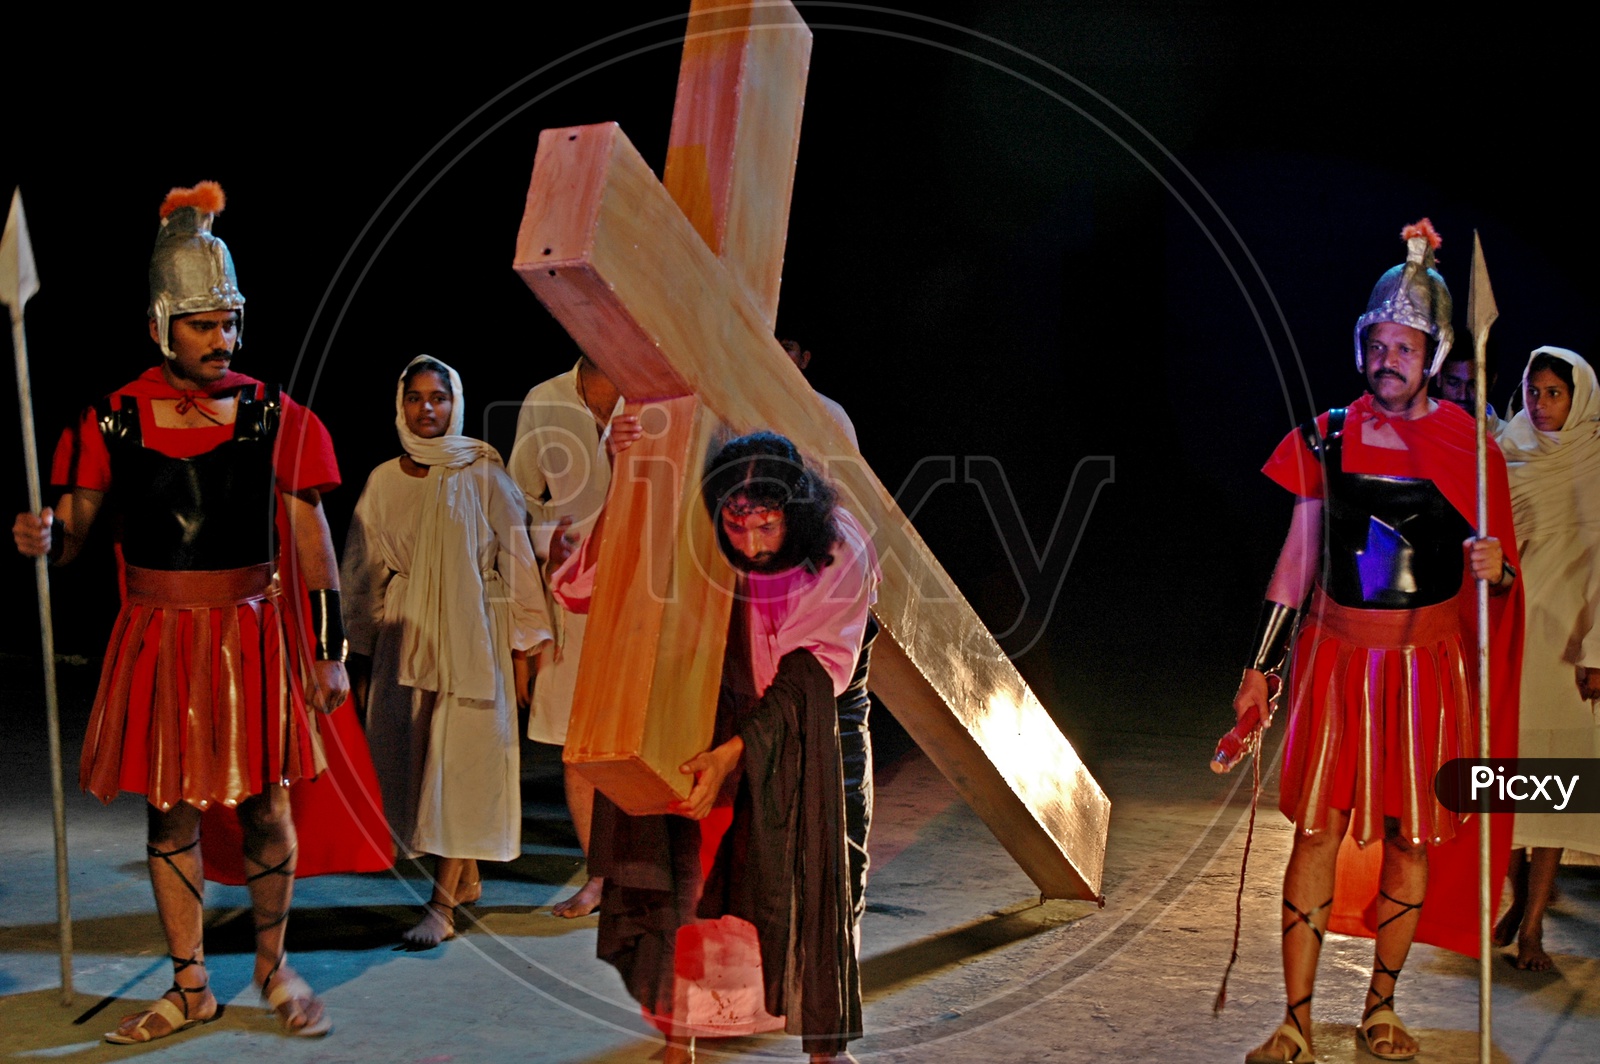 Man dressed up as Jesus carrying cross during a skit